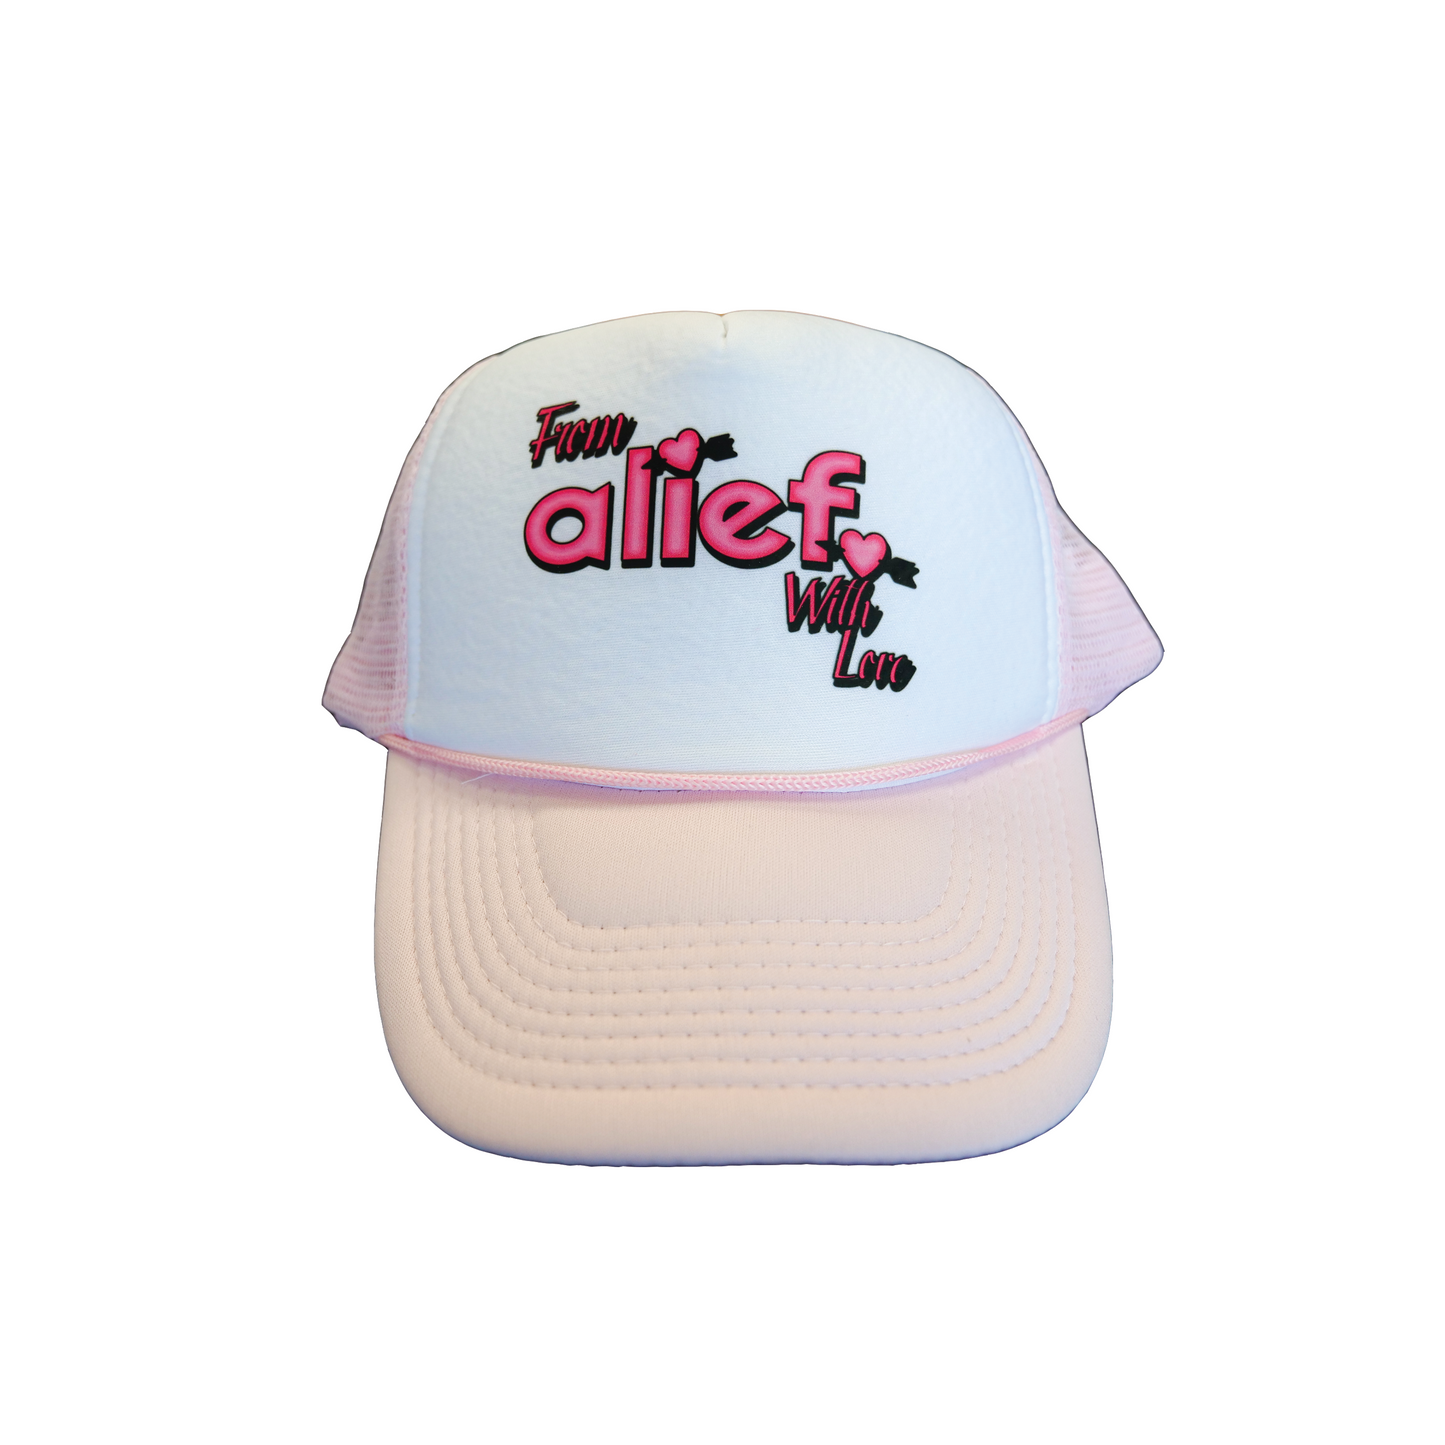 From Alief With Love hat